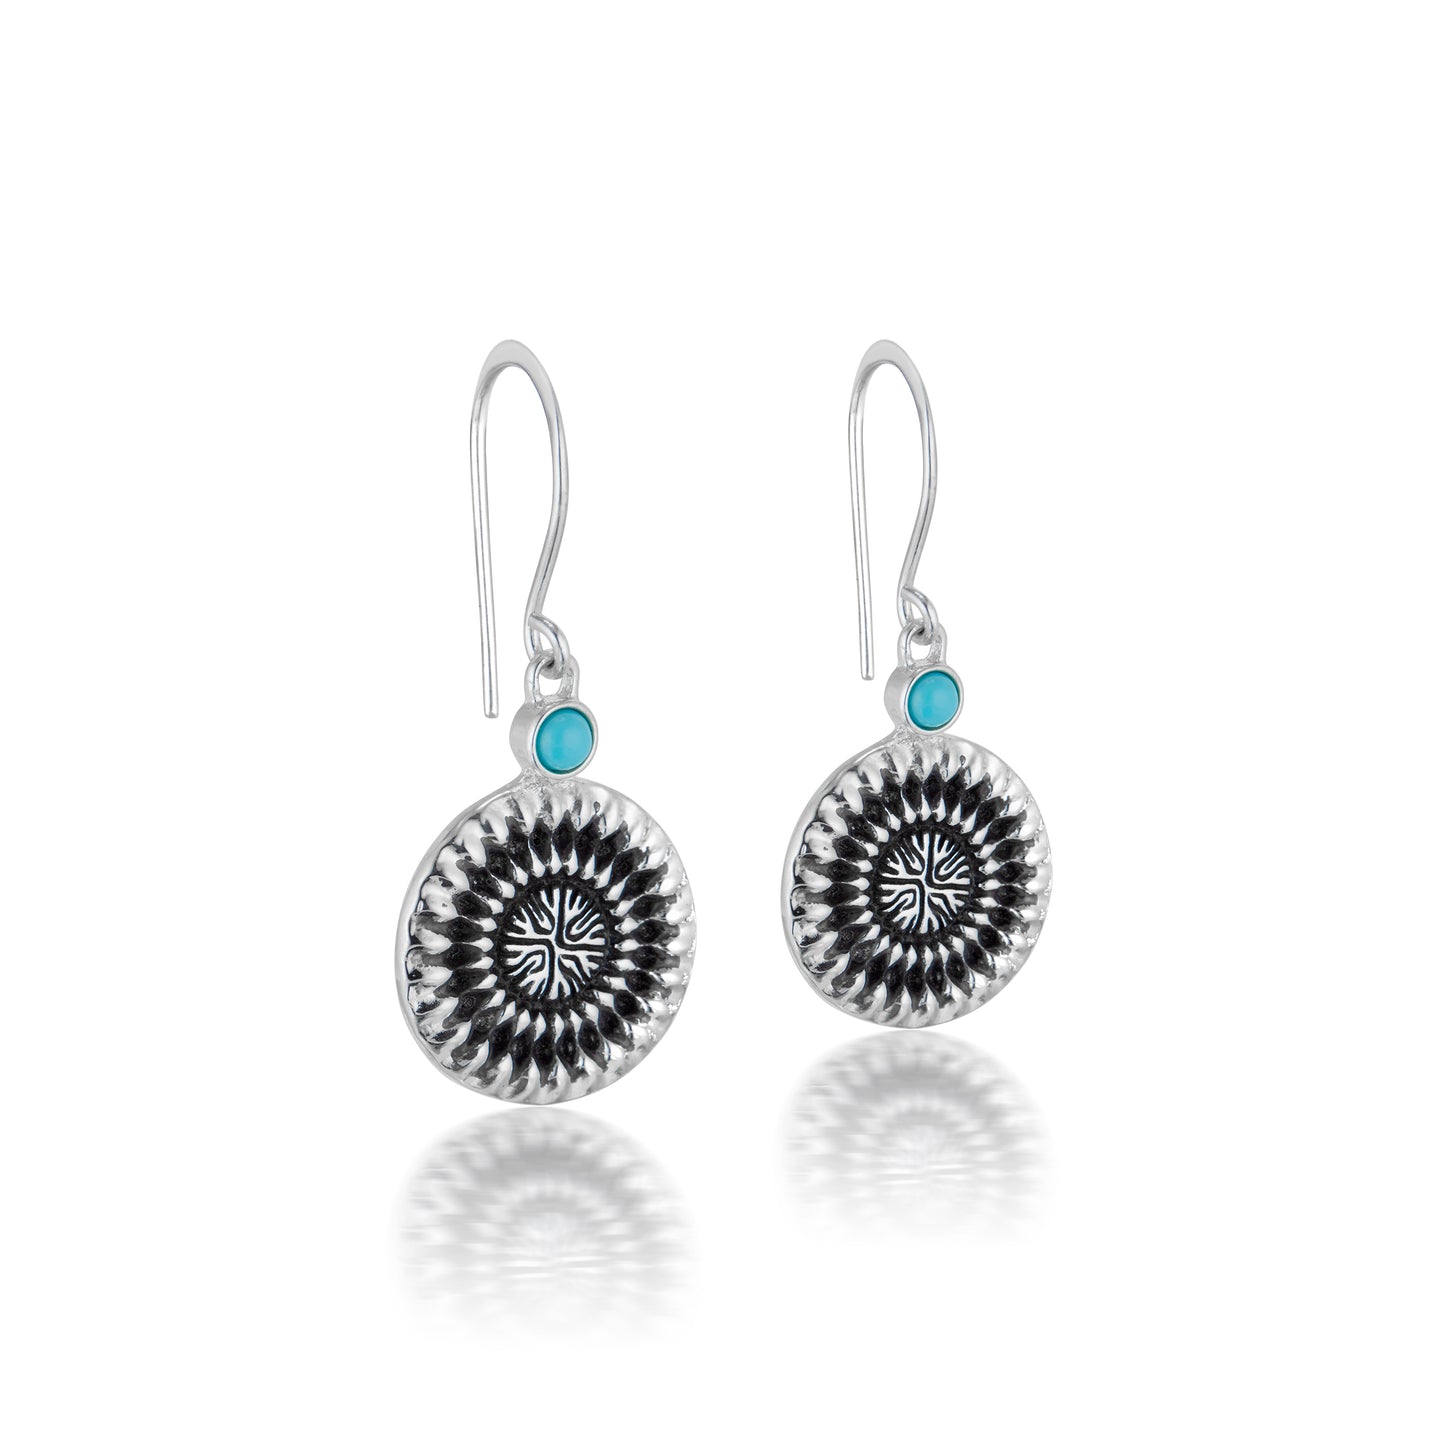 Impression of Love Earrings - Turquoise